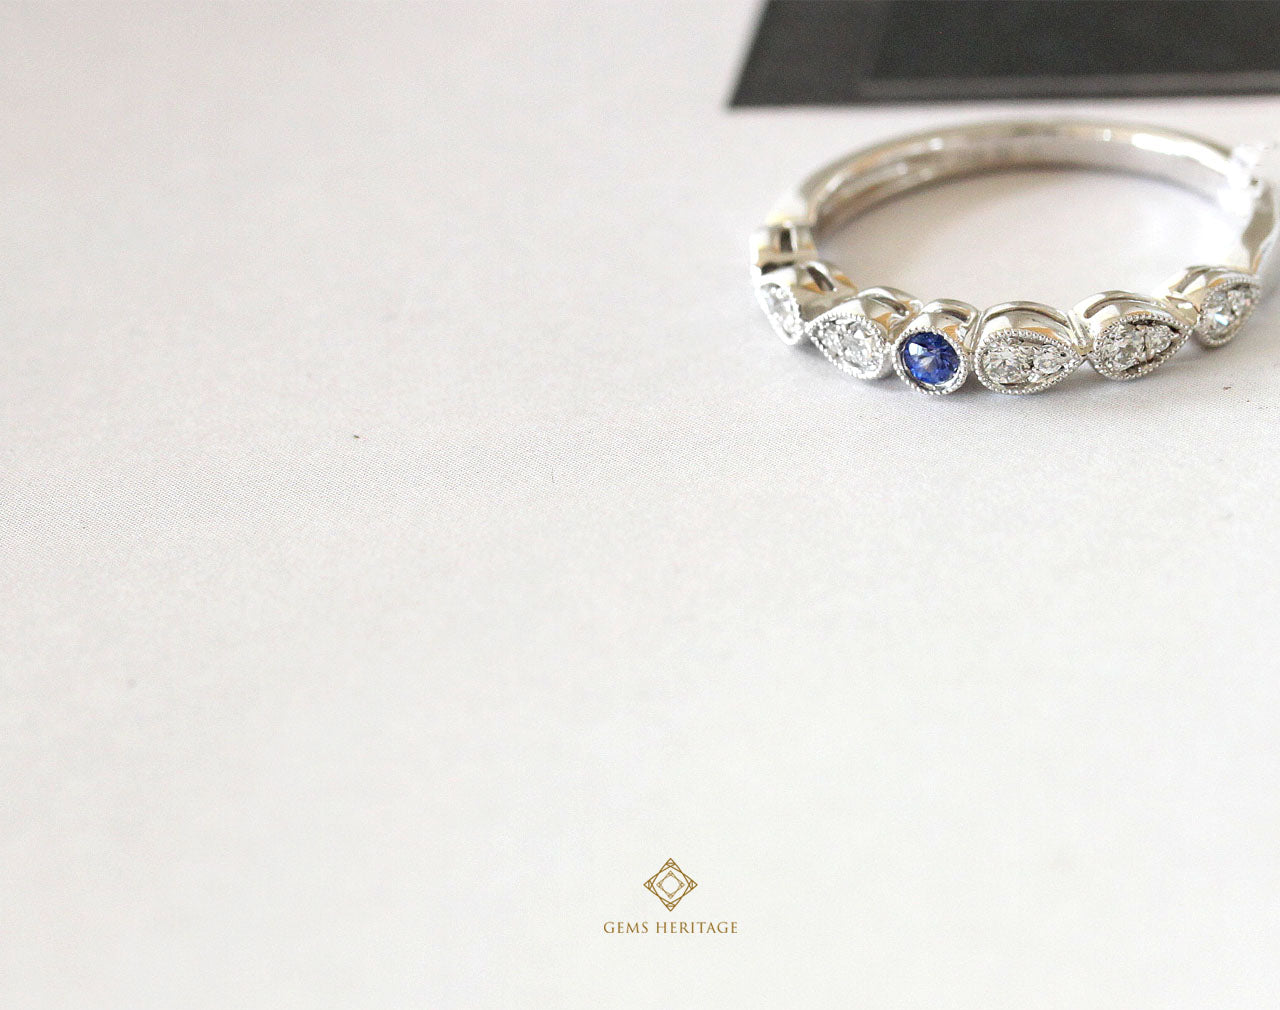 Tiny blue sapphire in a diamond ring